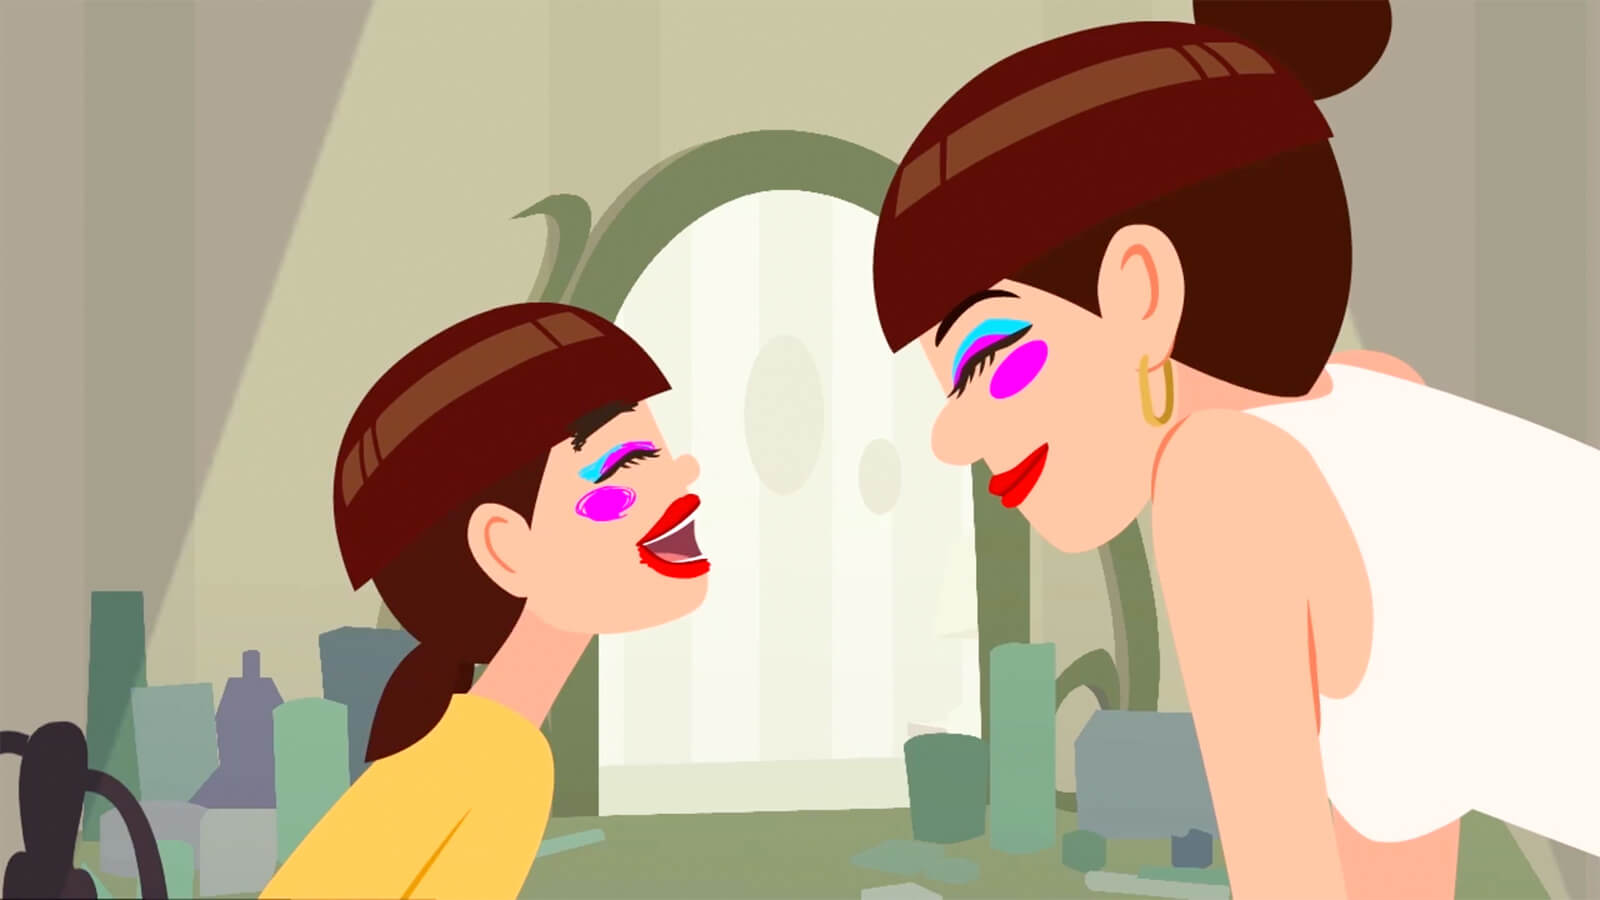 A young girl and her mother smile at each other, each with similar bright pink, aqua, and red makeup applied to their faces.